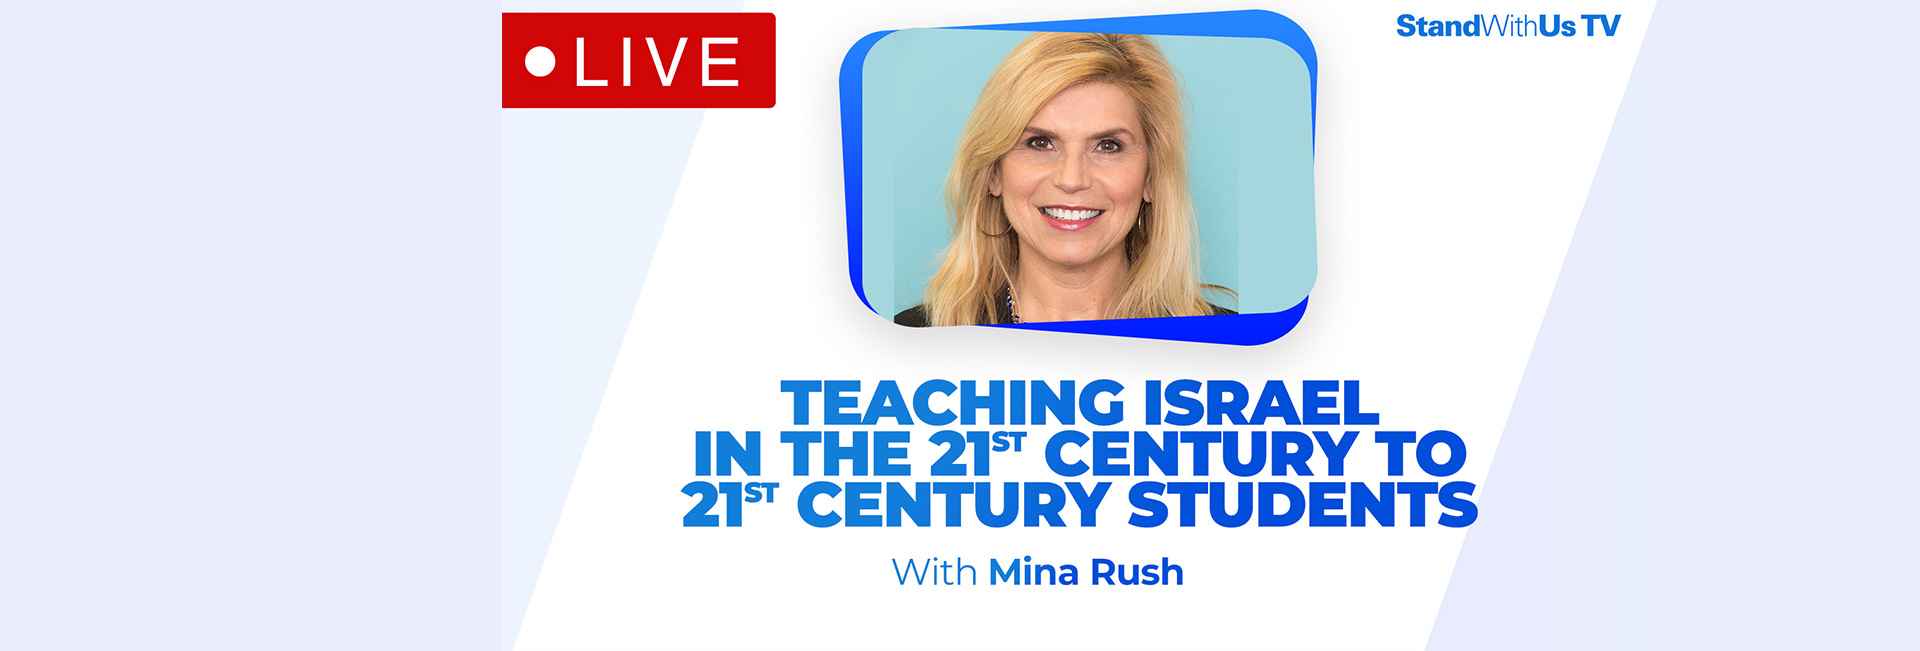 Teaching Israel in the 21st Century to 21st Century Students